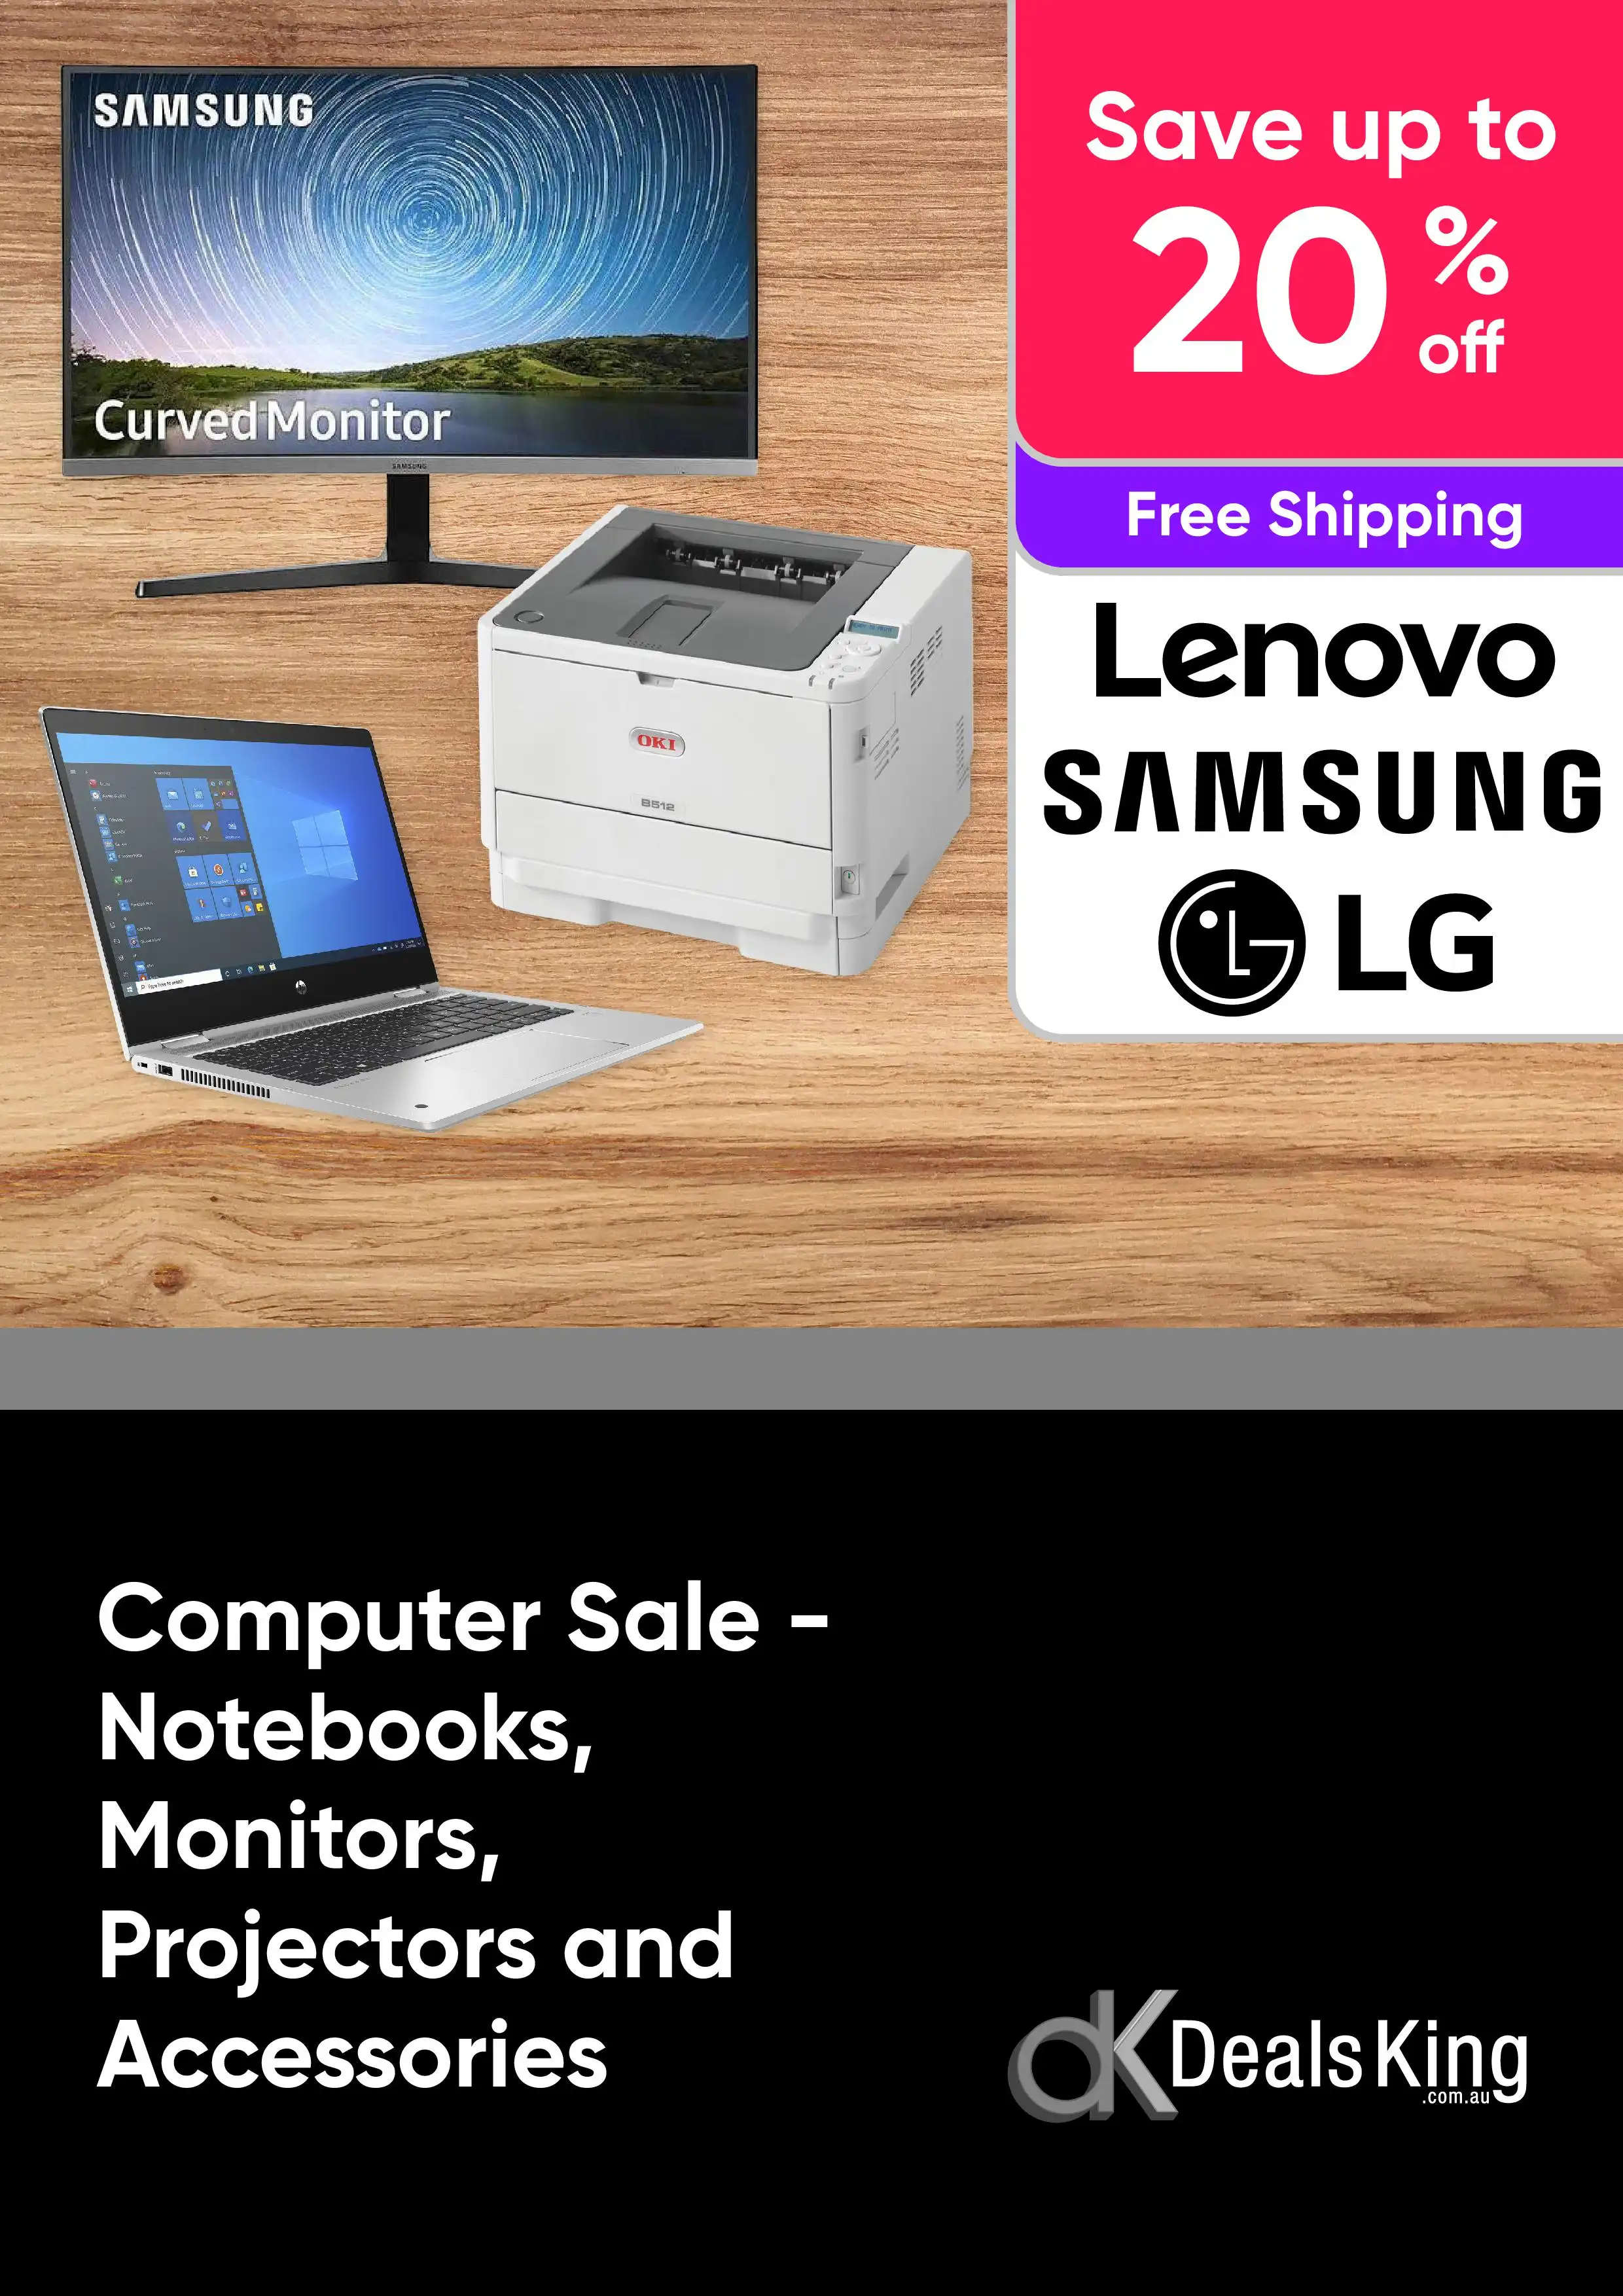 Computer Sale - Notebooks, Monitors, Projectors and Accessory Deals Save Up To 20%